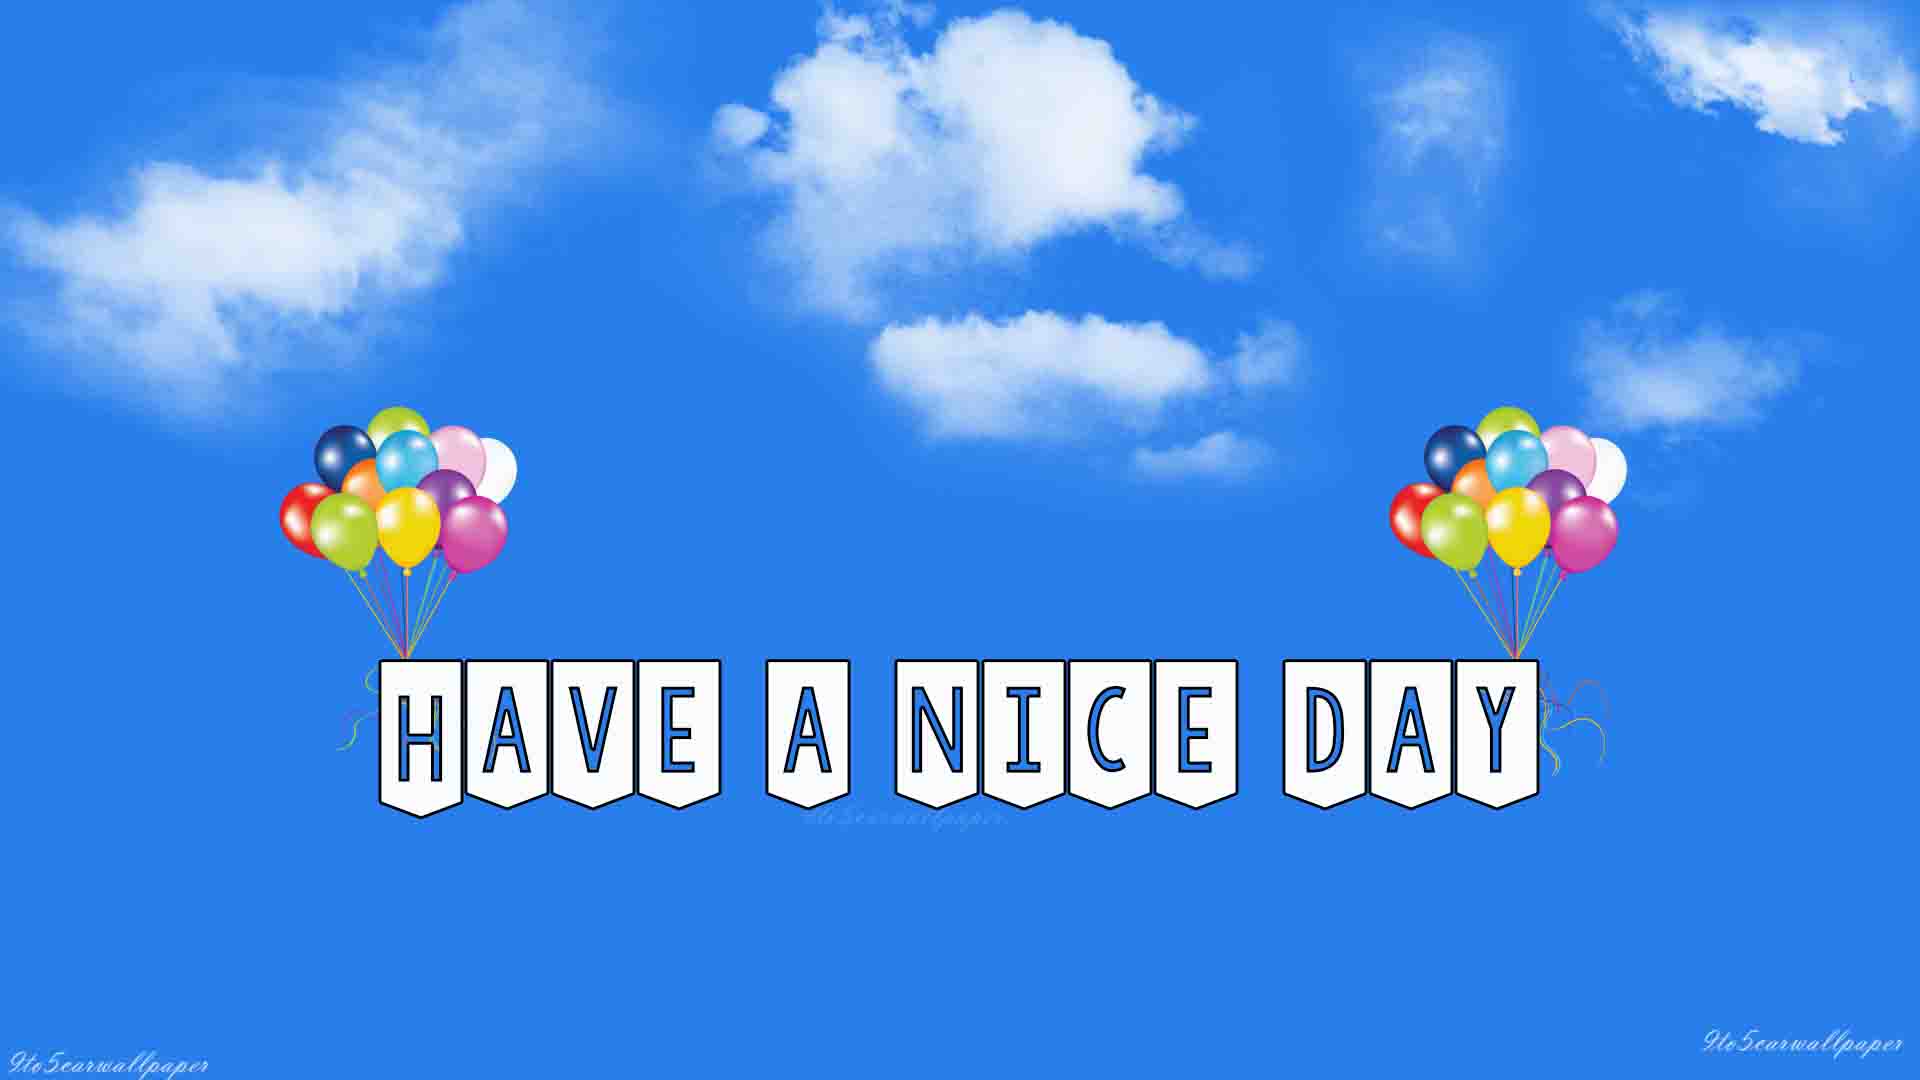 Have A Nice Day Image, Wishes & Quotes